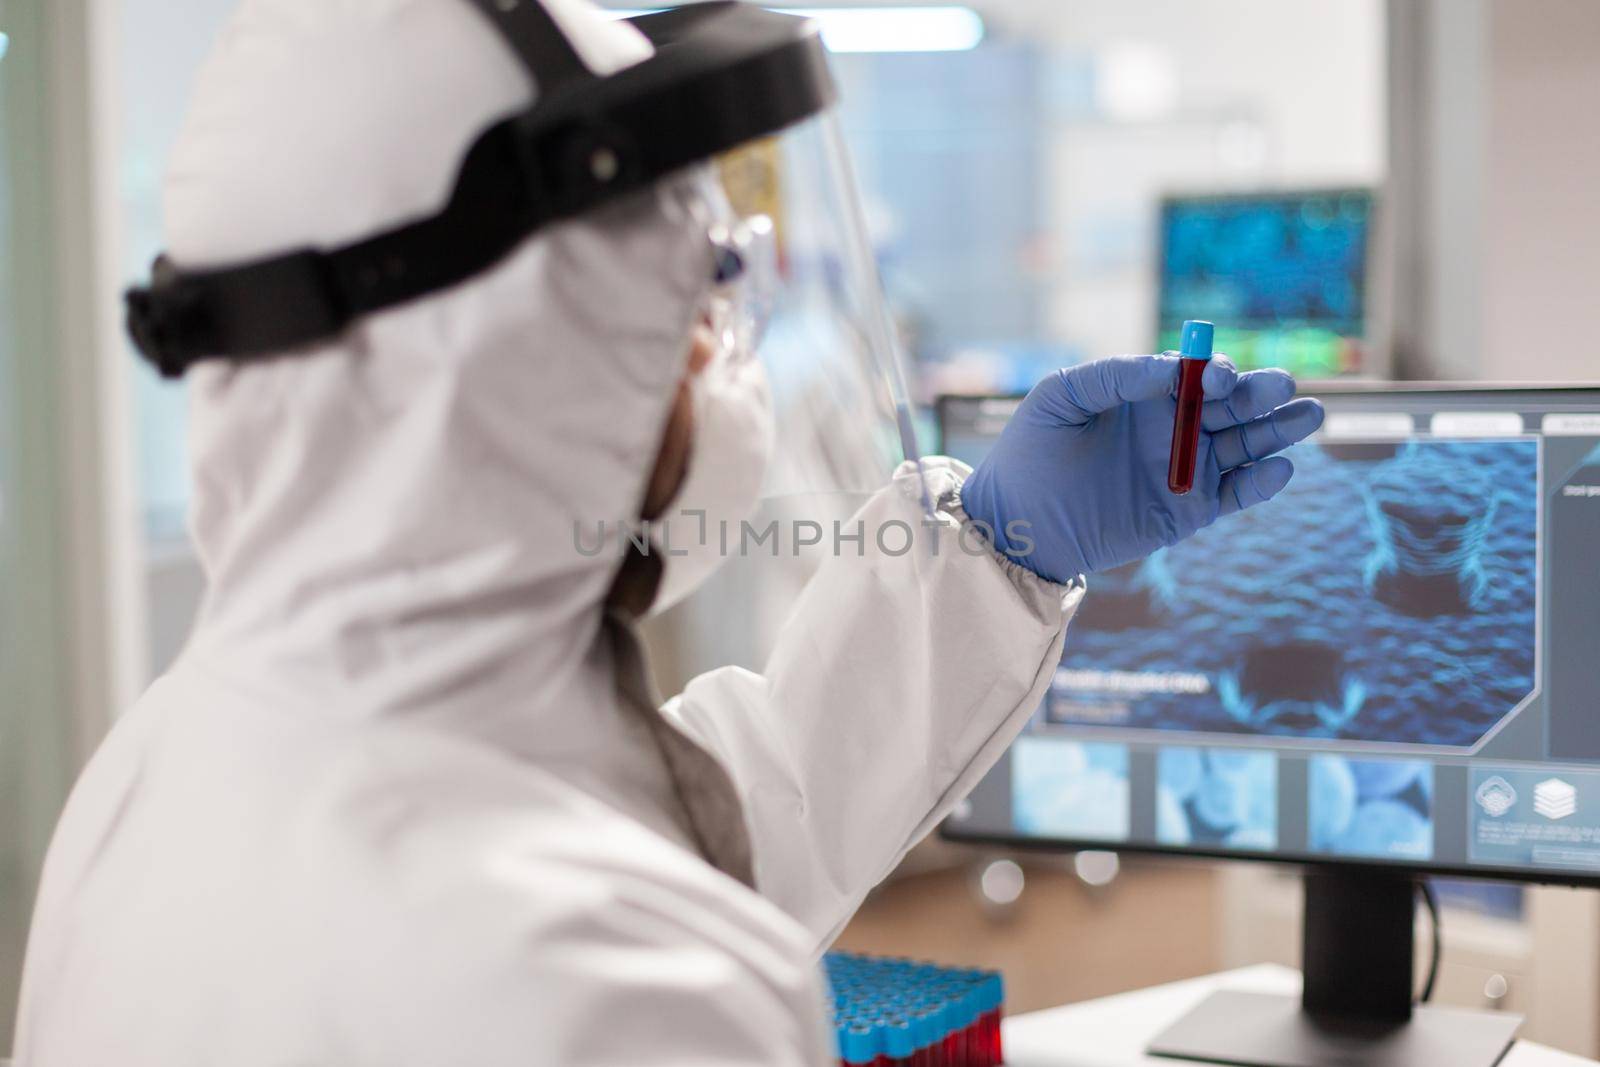 Scientist analyzing blood sample in vaccutainer dressed in ppe suit. Medical team examining vaccine evolution in medical lab using high tech and chemistry tools for scientific research